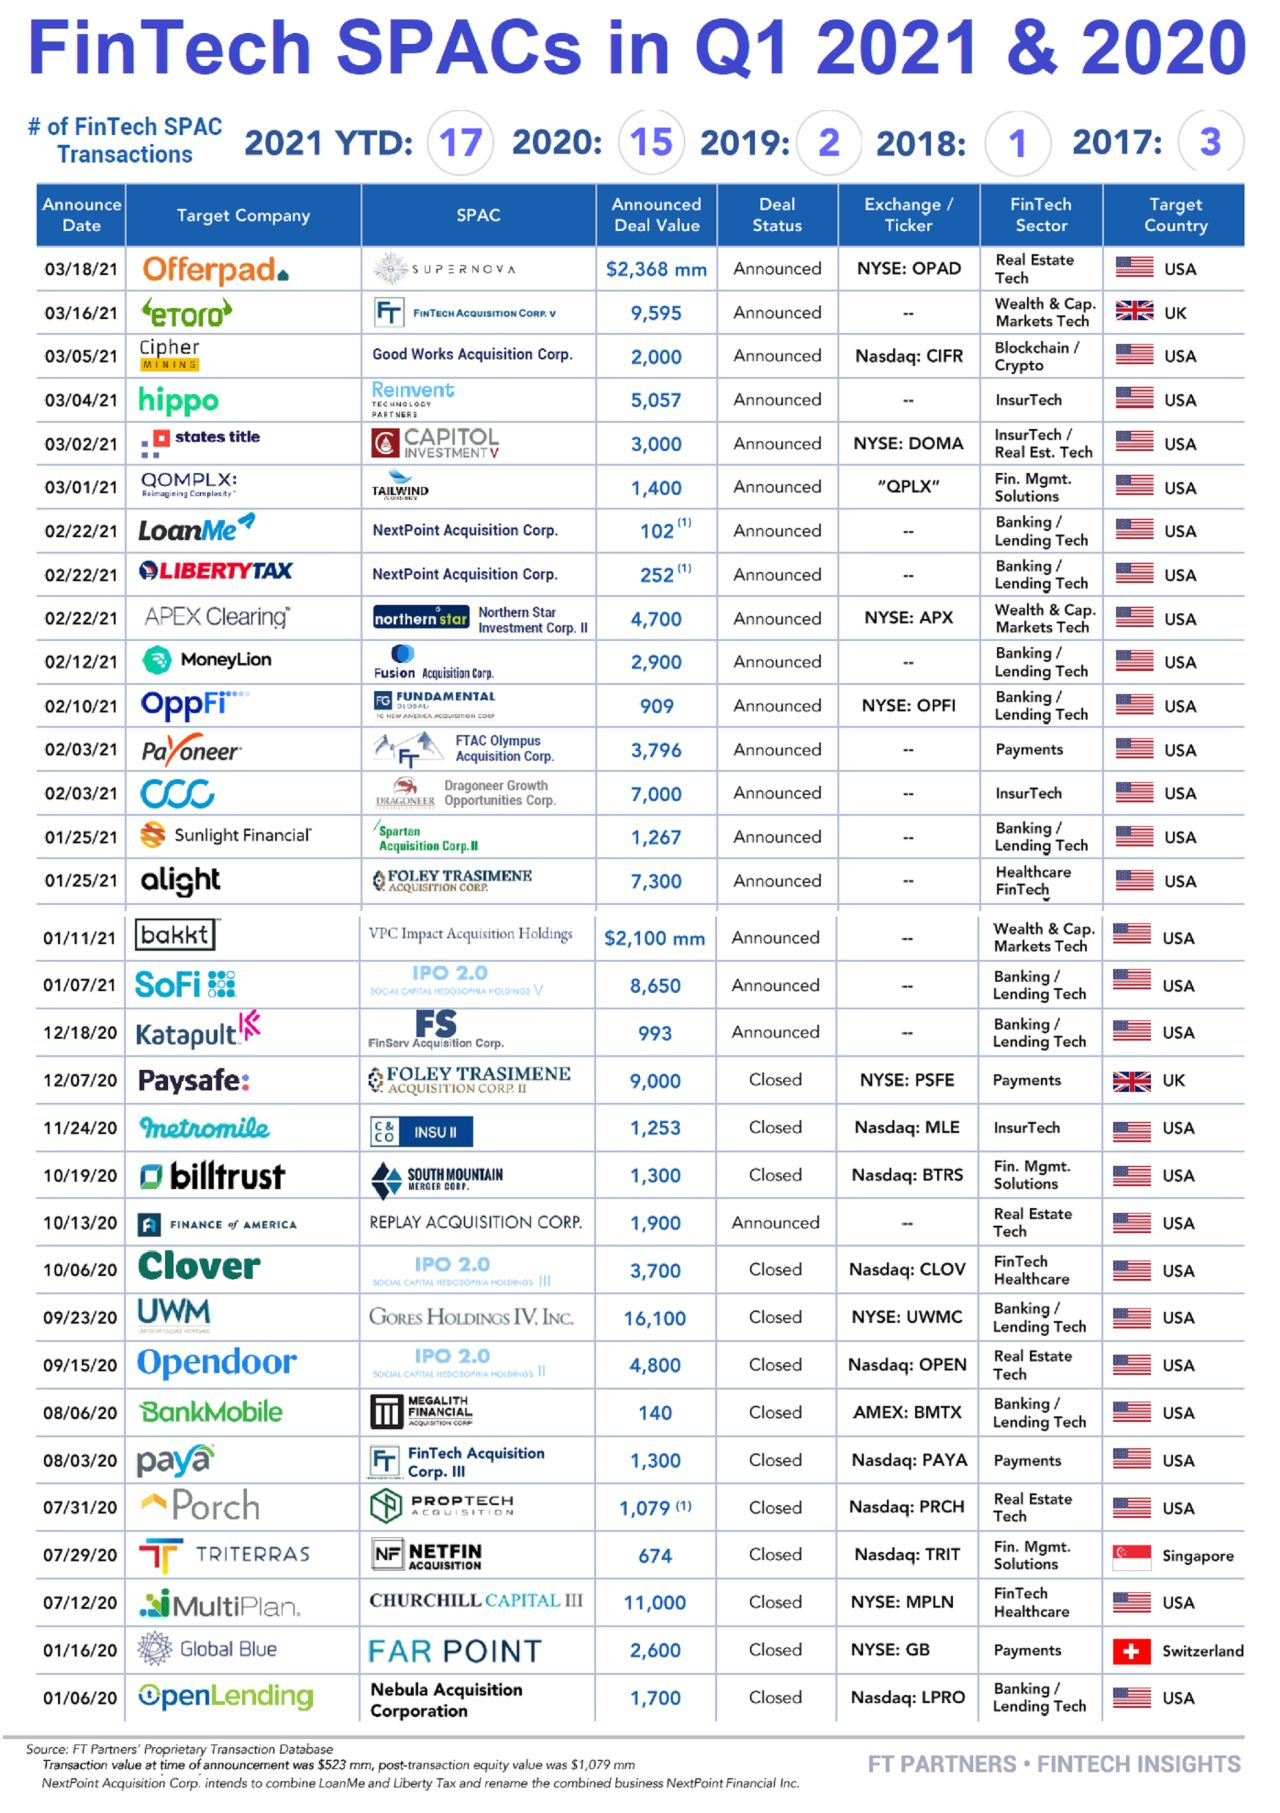 Fintech SPACs in Q1 2021 and 2020, Source- FT Partners